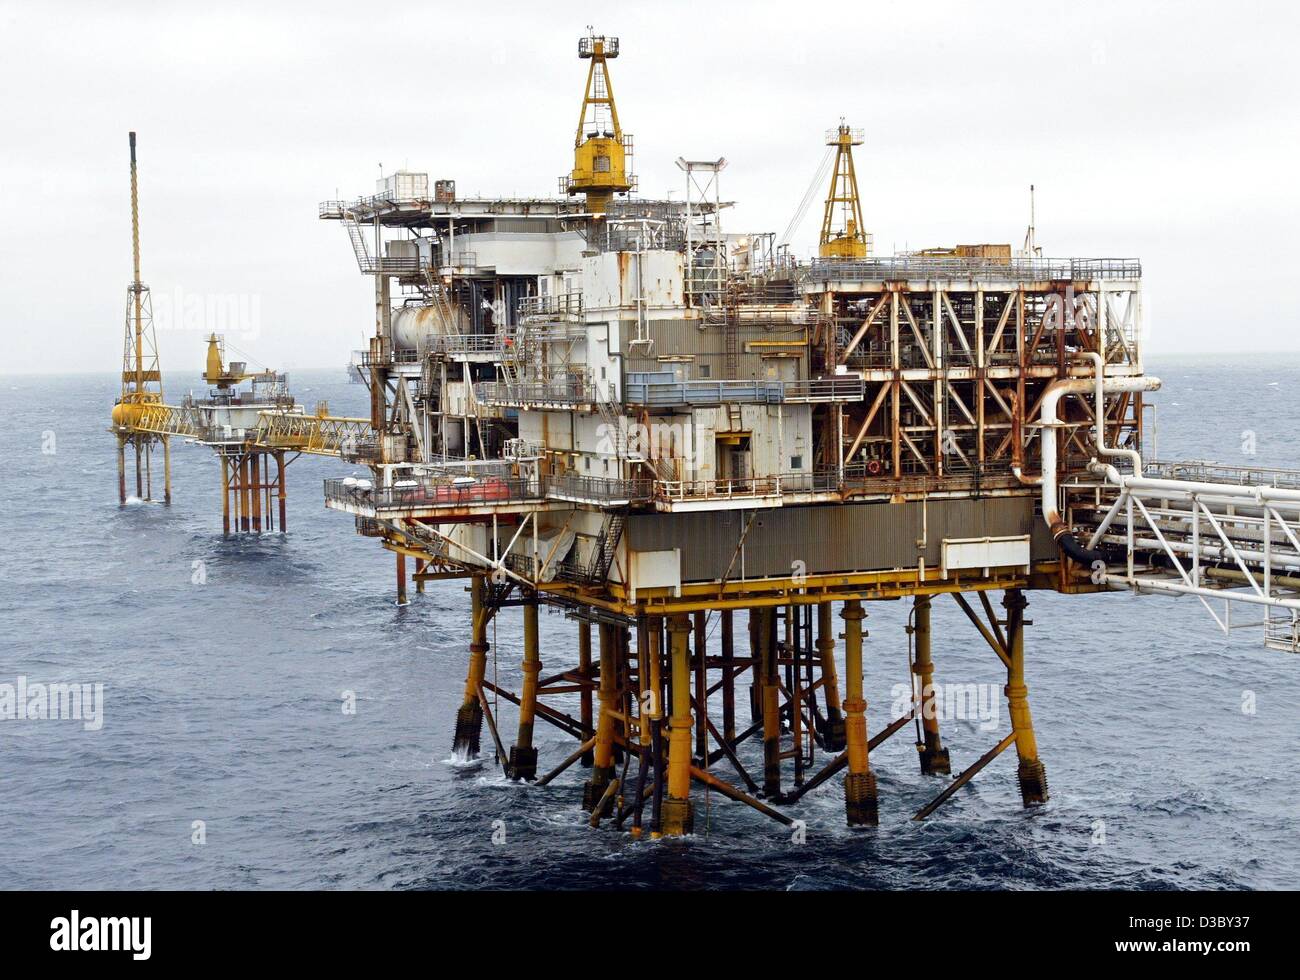 (dpa) - A view of a gas and oil rig in the North Sea, about 250 km offshore of Stavanger, Norway, 5 July 2003. The platform belongs to the Ekofisk field complex, which comprises the oil and gas rigs Ekofisk, Eldfisk, Embla and Tor. The workers stay two weeks on the rig working 12 hour shifts, and th Stock Photo